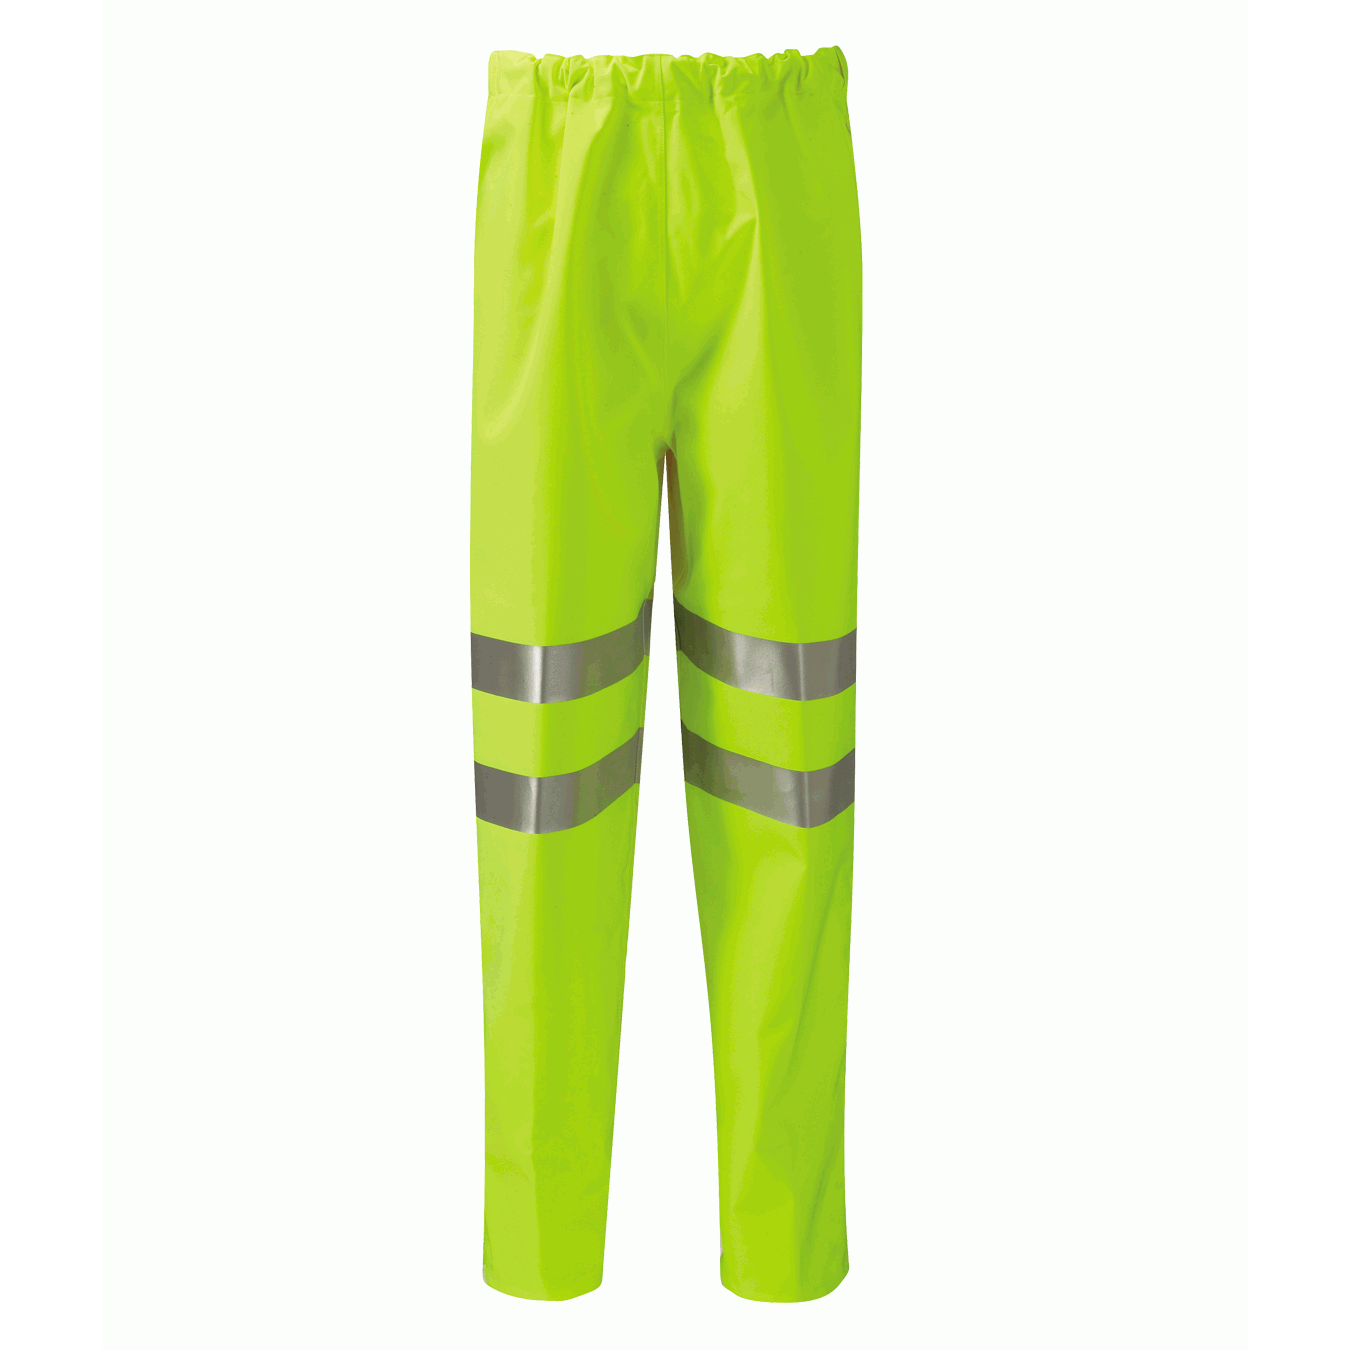 RHINE: 3 LAYER GORE-TEX® OVER TROUSERS - YELLOW